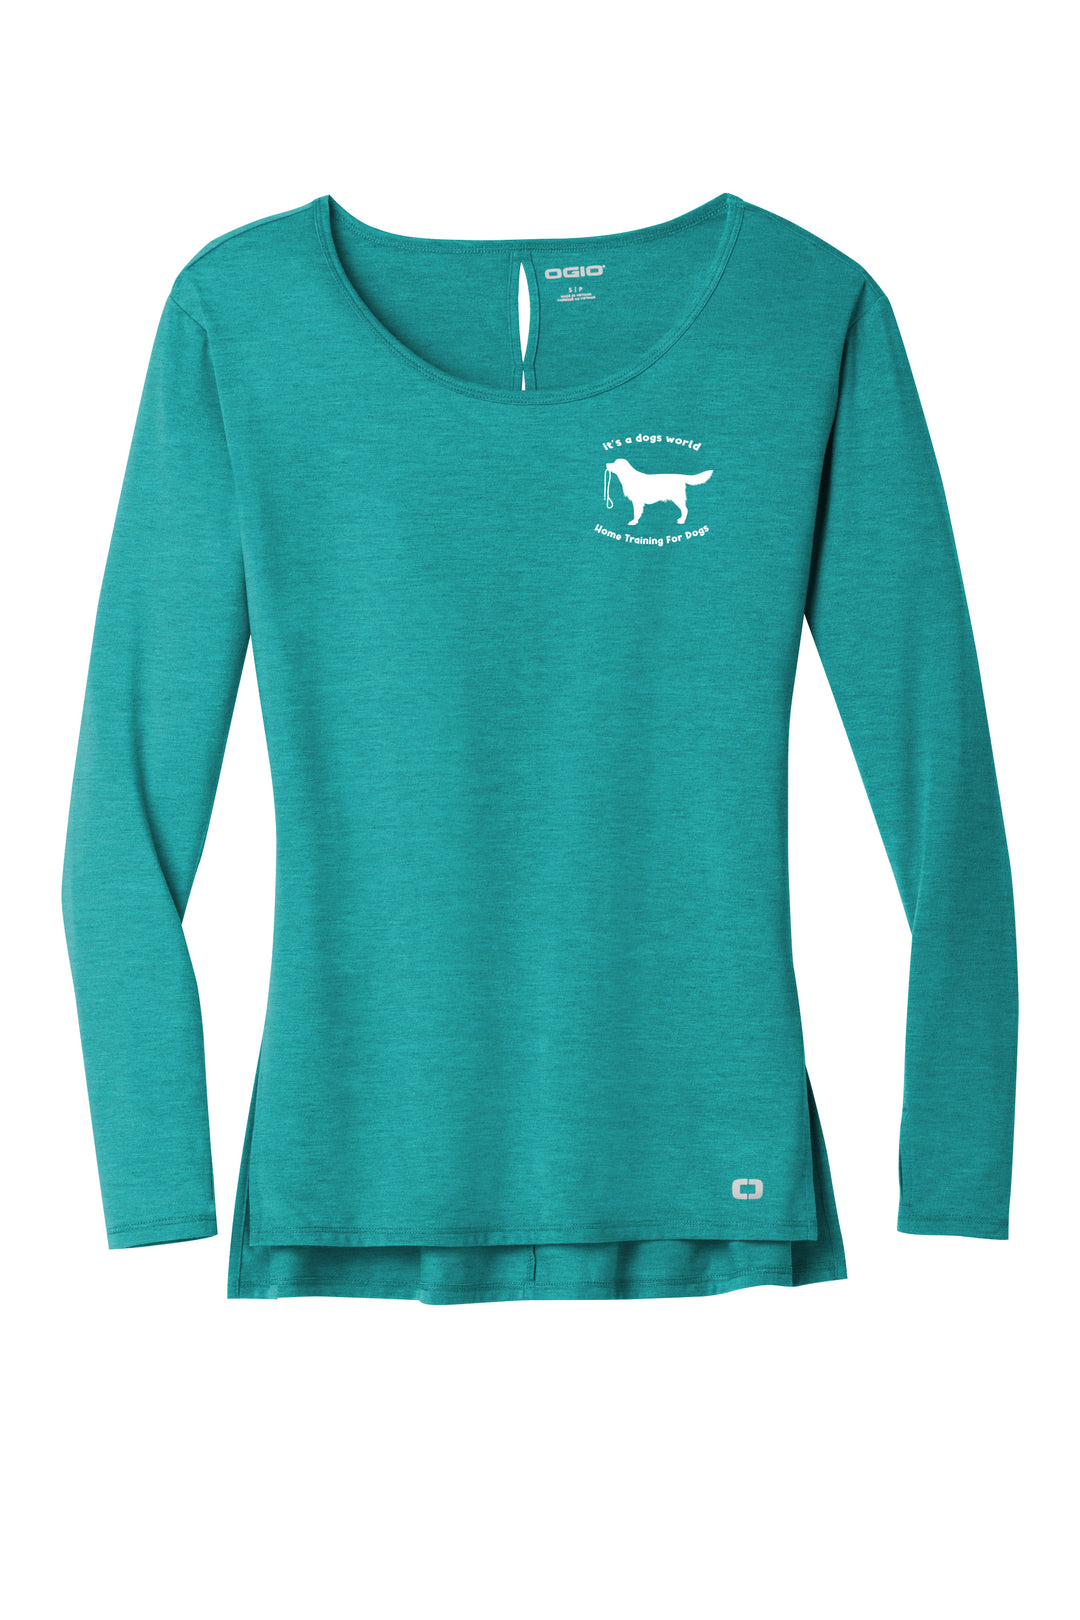 Home Training for Dogs Ladies Long Sleeve Tunic (LOG802)